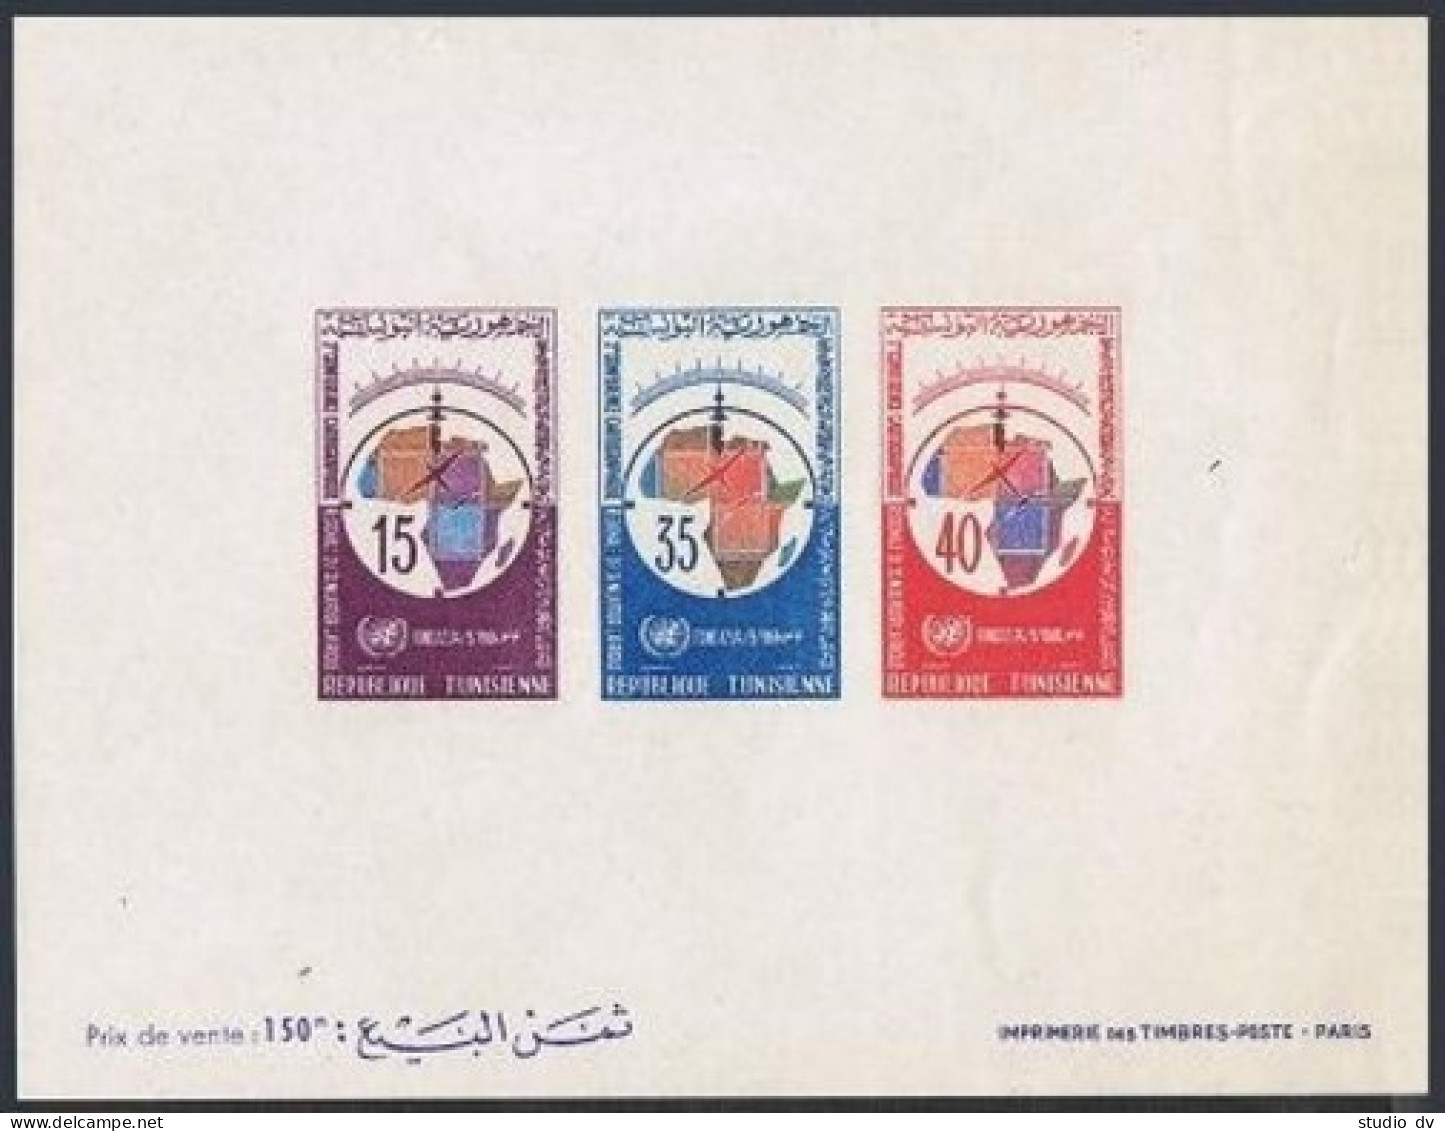 Tunisia 466a Imperf, MNH. Mi Bl.2B. Cartographic Conference For Africa, 1966. - Tunisia